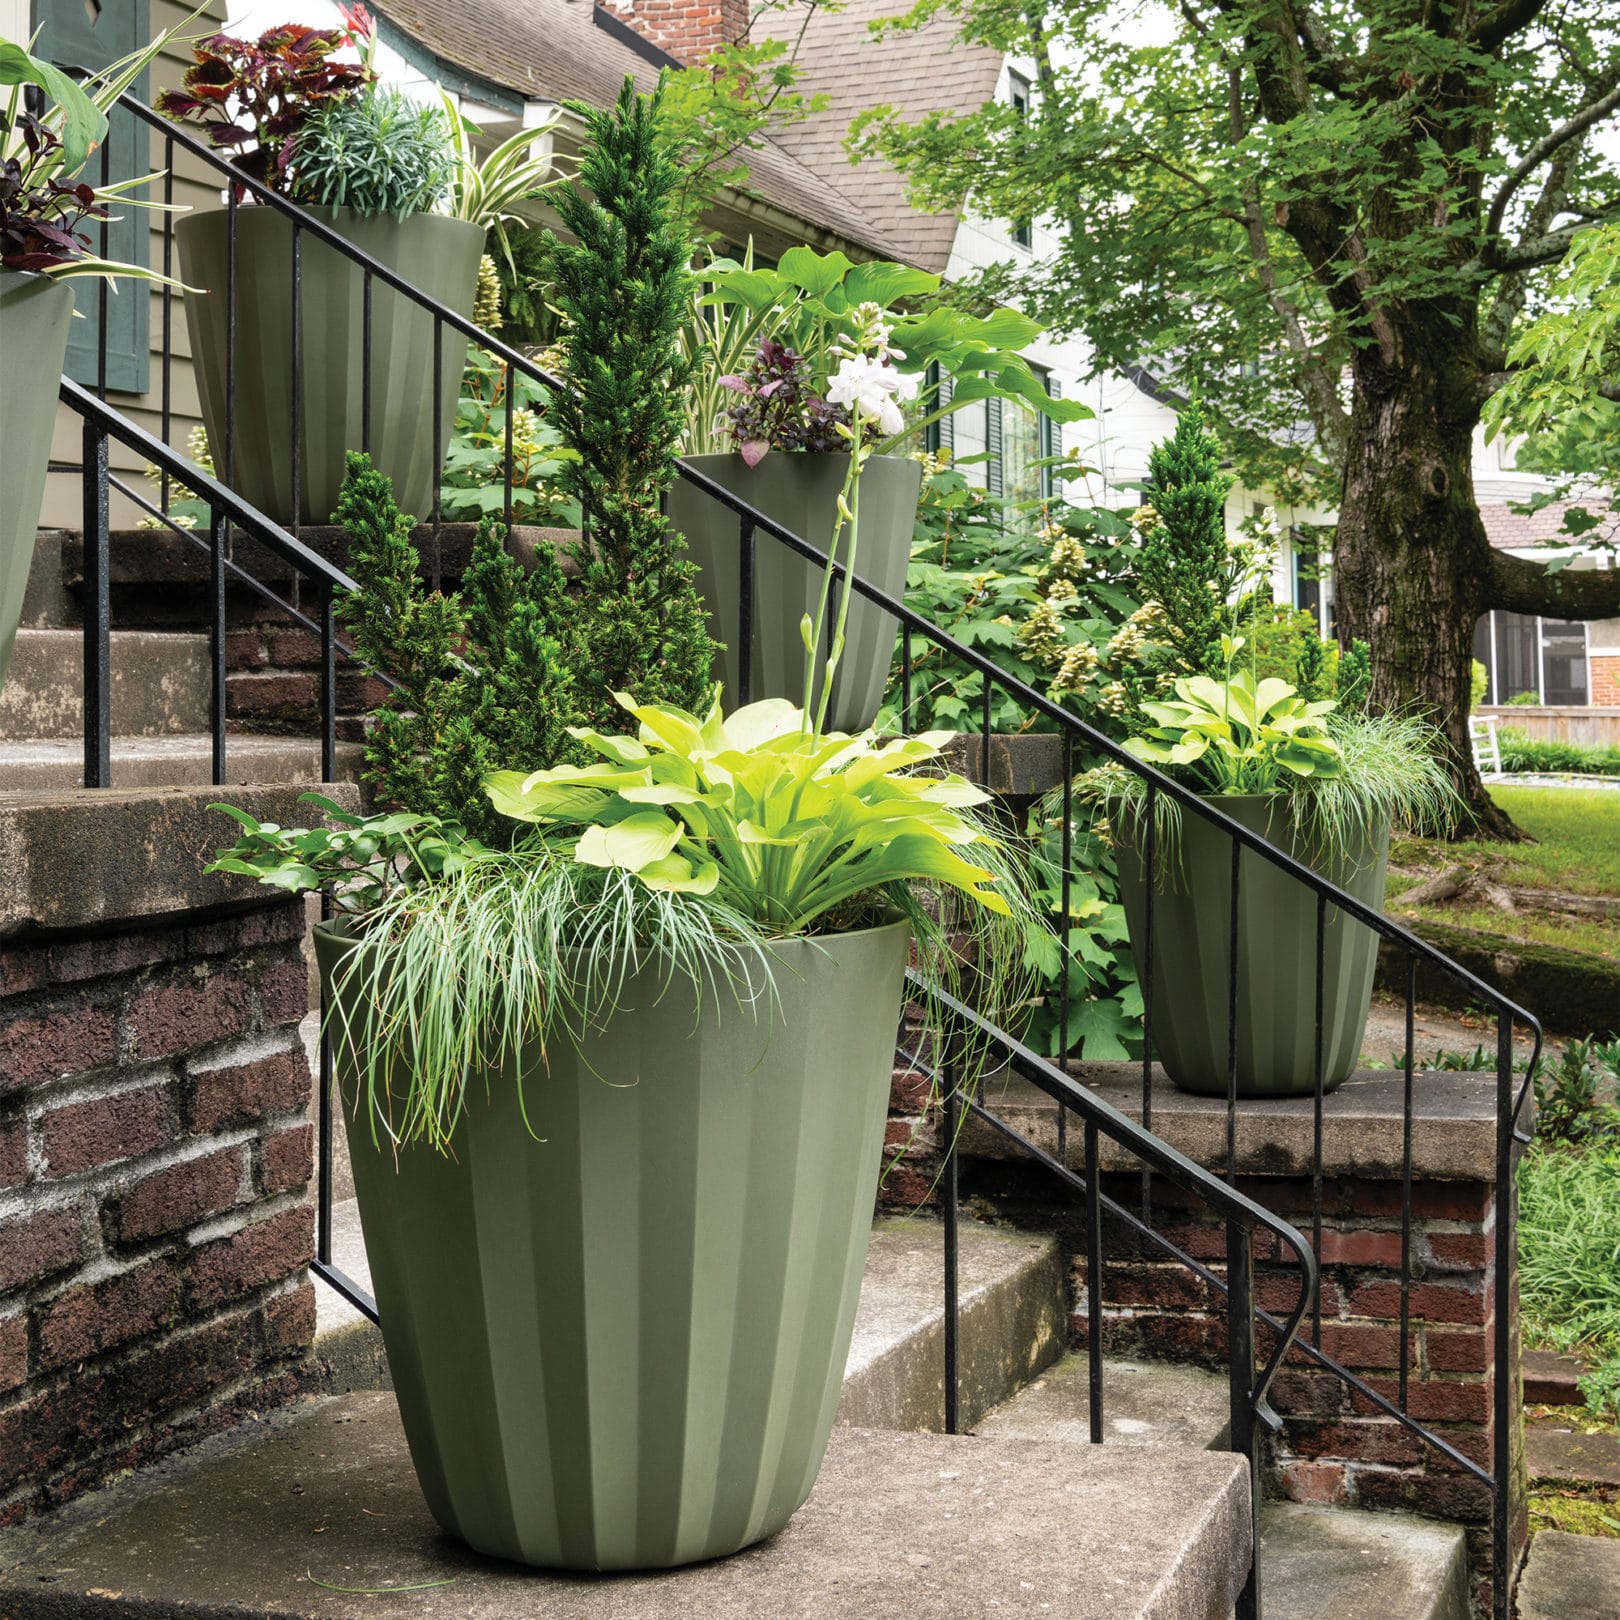 https://www.crescentgarden.com/wp-content/uploads/2020/05/Steps-Railing-with-Pleat-Planters-scaled.jpg